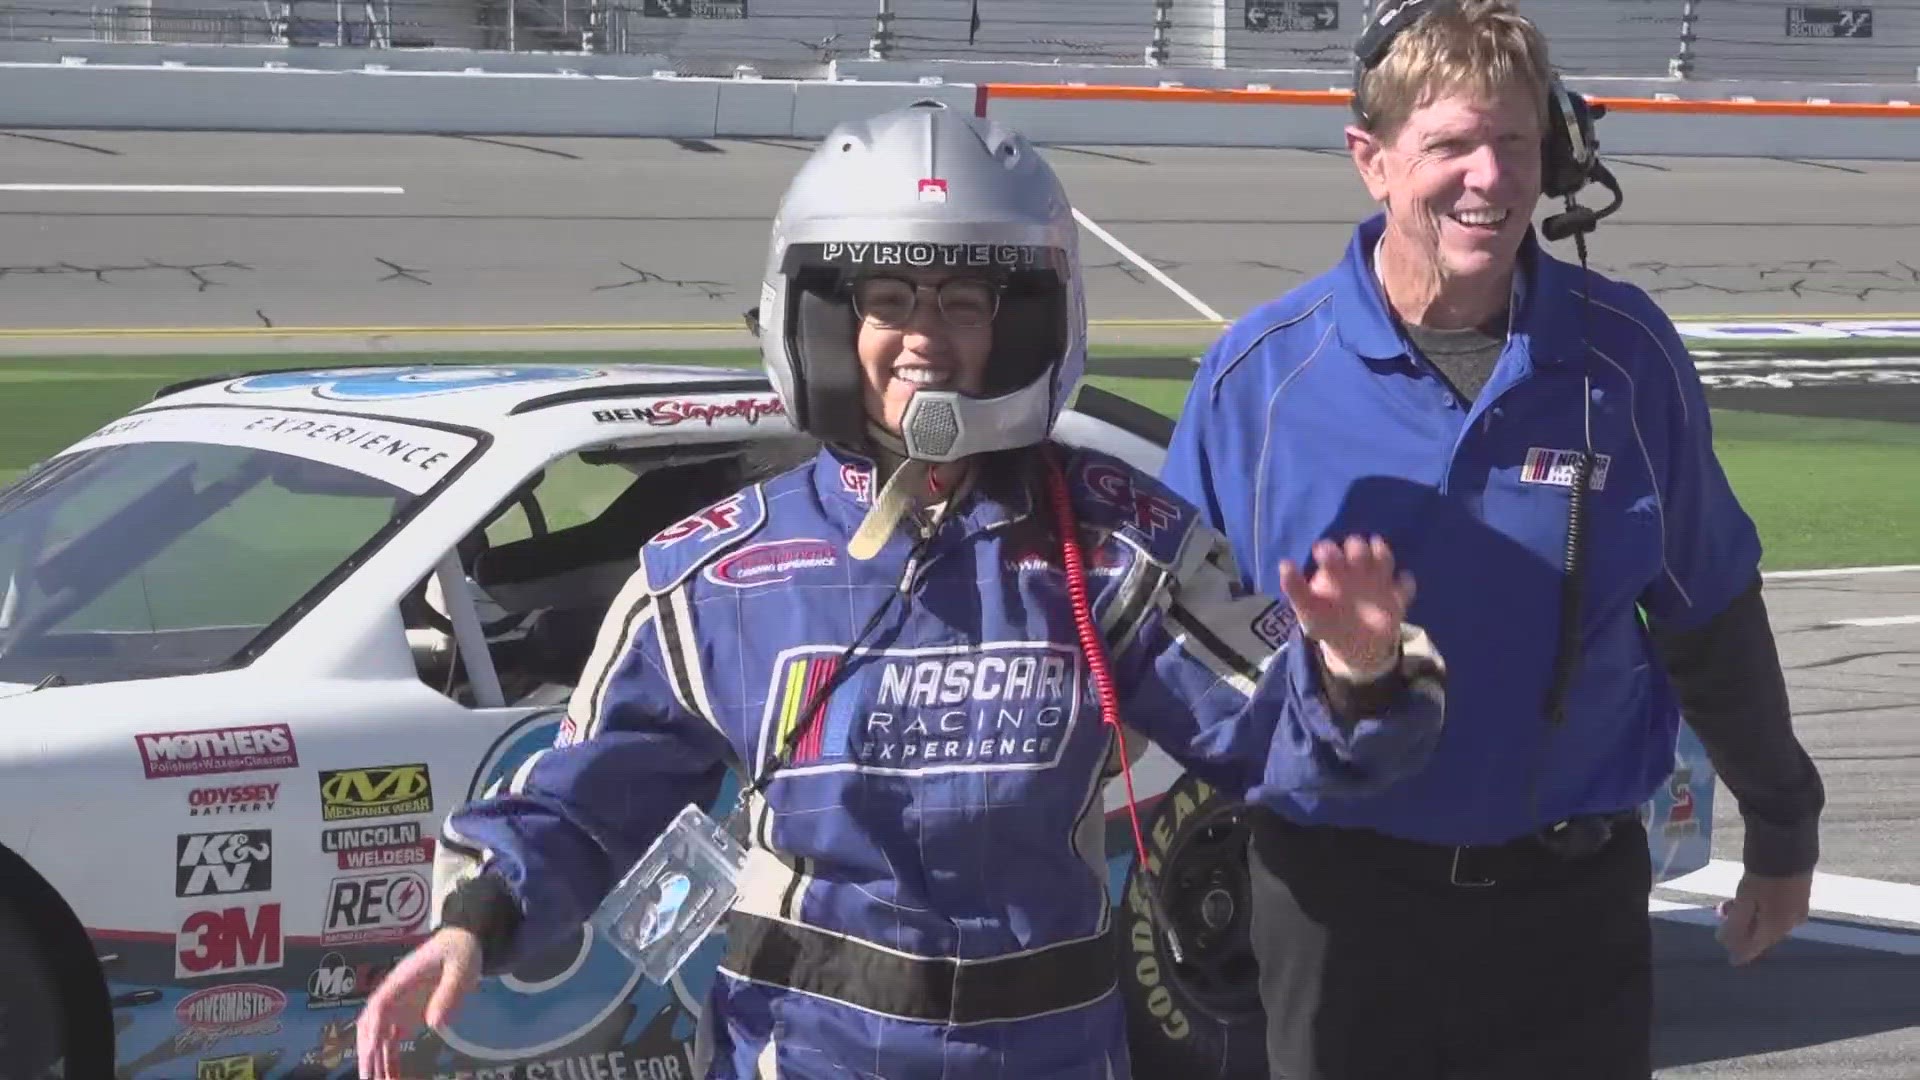 First Coast News Sports Reporter Ashley Gonzalez got in the driver's seat at Daytona International Speedway to show us what it looks like for the pros.